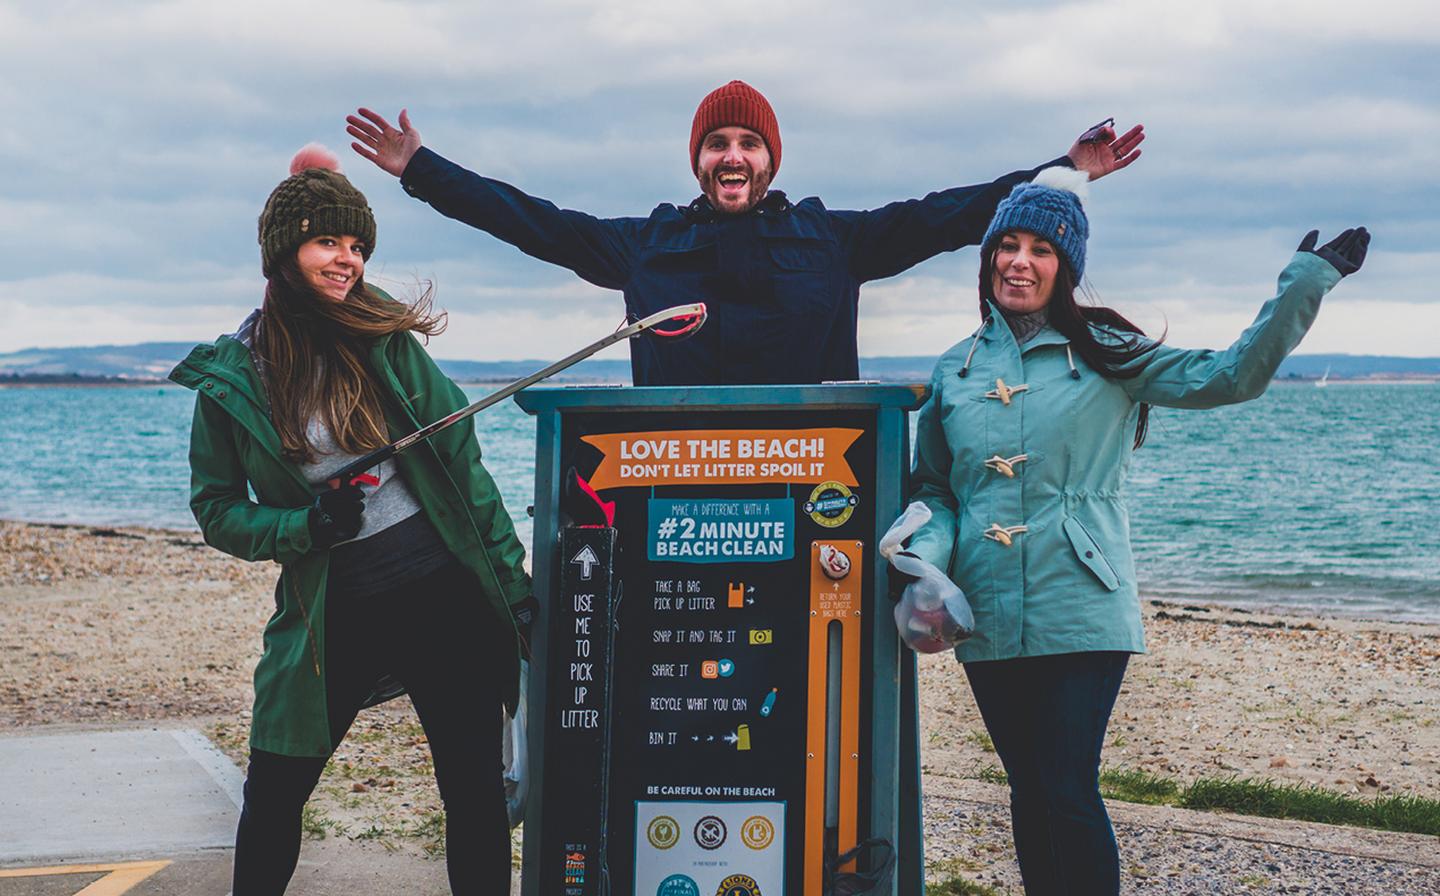 The team celebrate a successful beach clean by the 2 Minute Beach Clean station on Hayling Island